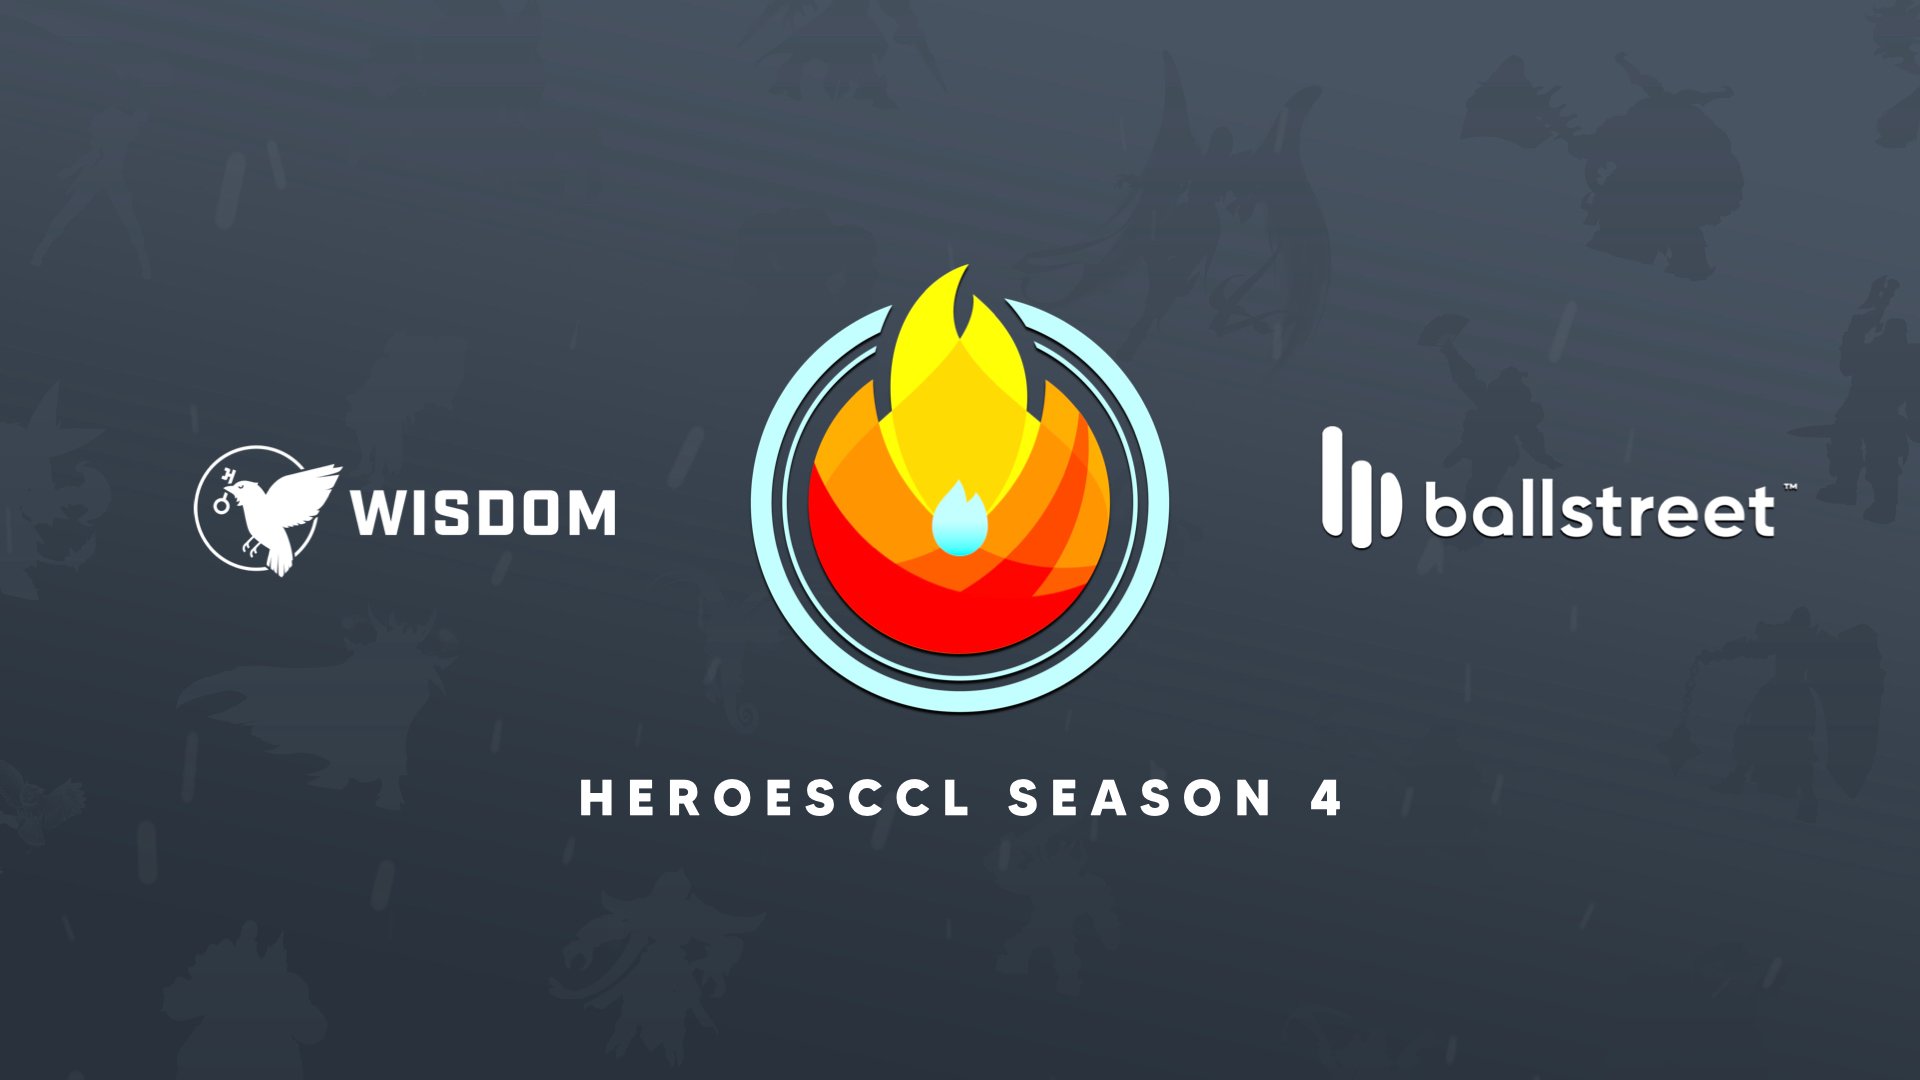 Wisdom Gaming partners with BallStreet Trading for HeroesCCL Season 4